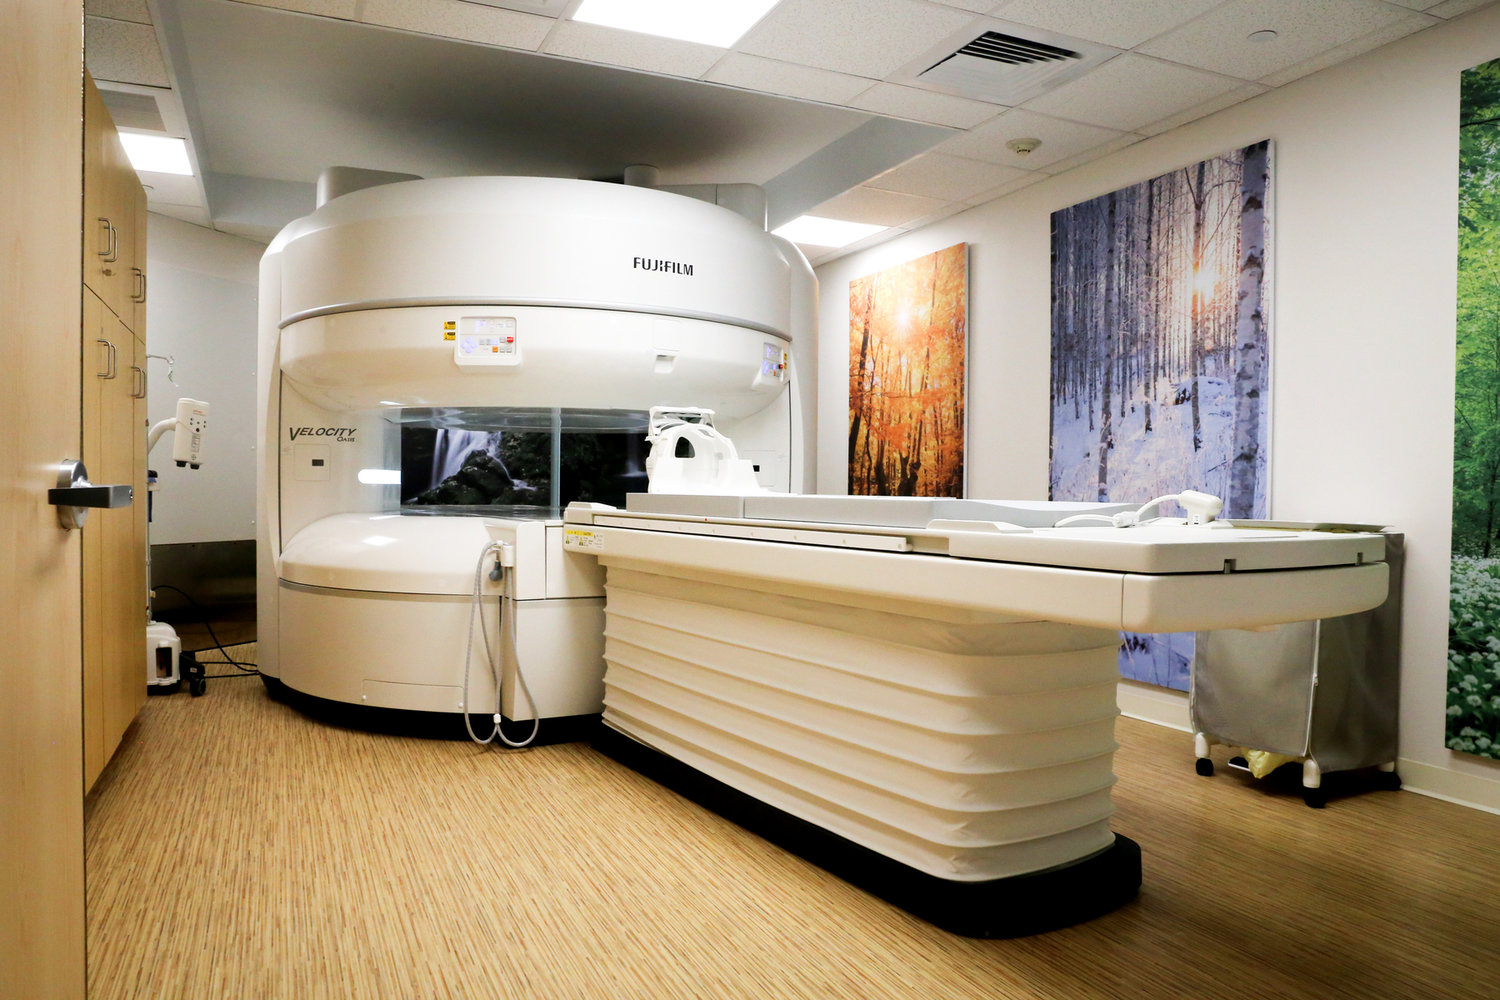 This open MRI machine now at Portsmouth Imaging Center offers greater comfort for patients who may normally experience feelings of claustrophobia during scans.